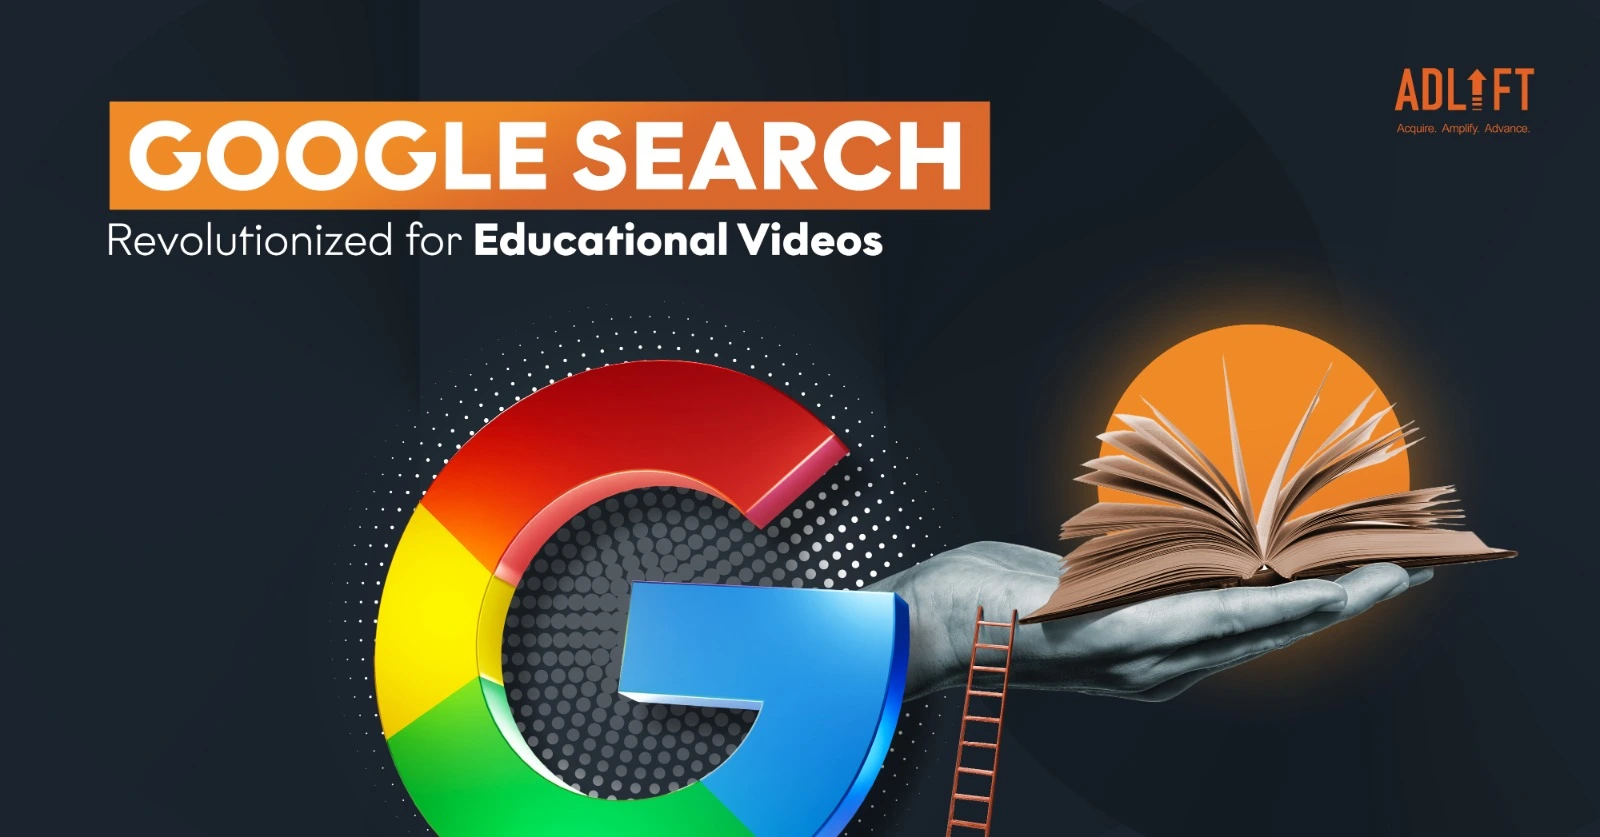 Google Search Revolutionized for Educational Videos